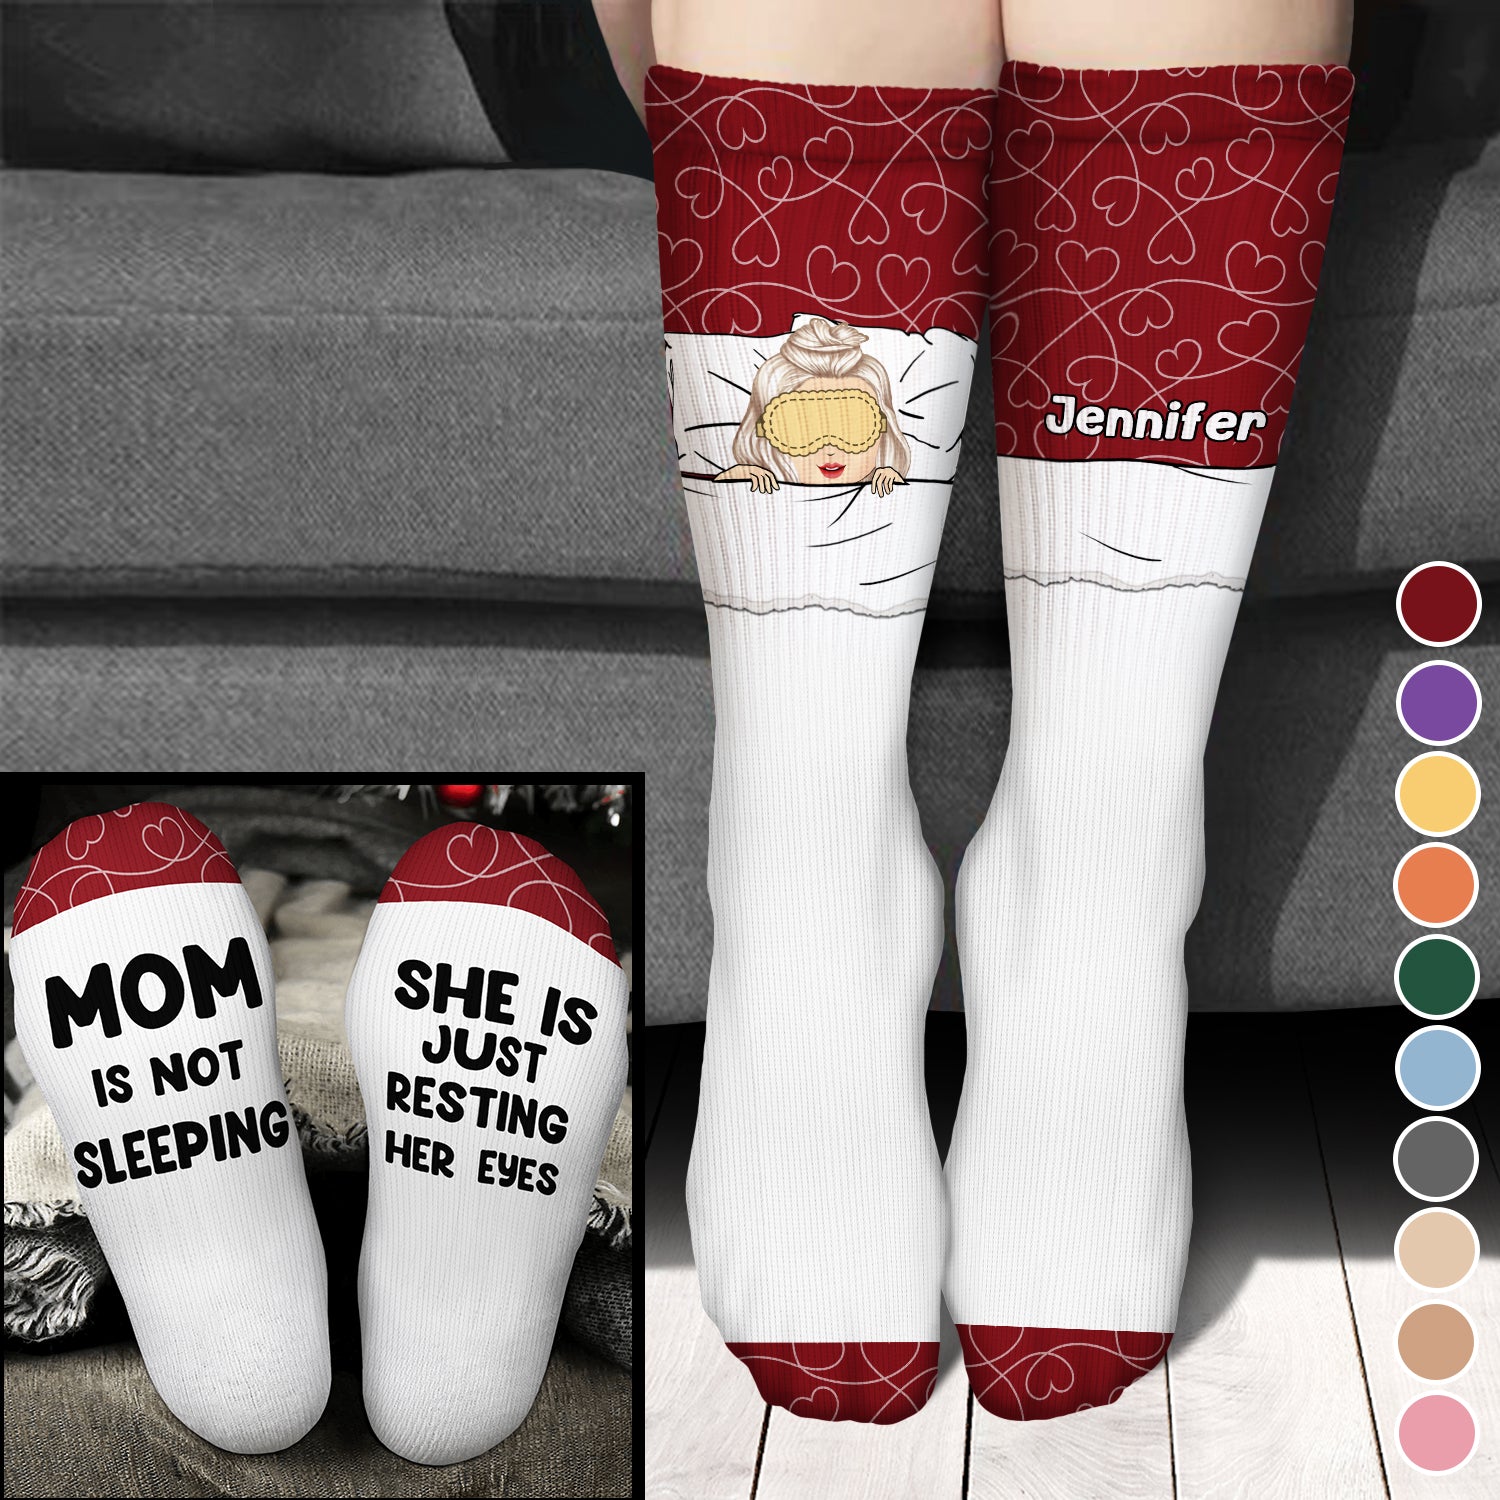 Mom's Not Sleeping - Gift For Mother - Personalized Socks